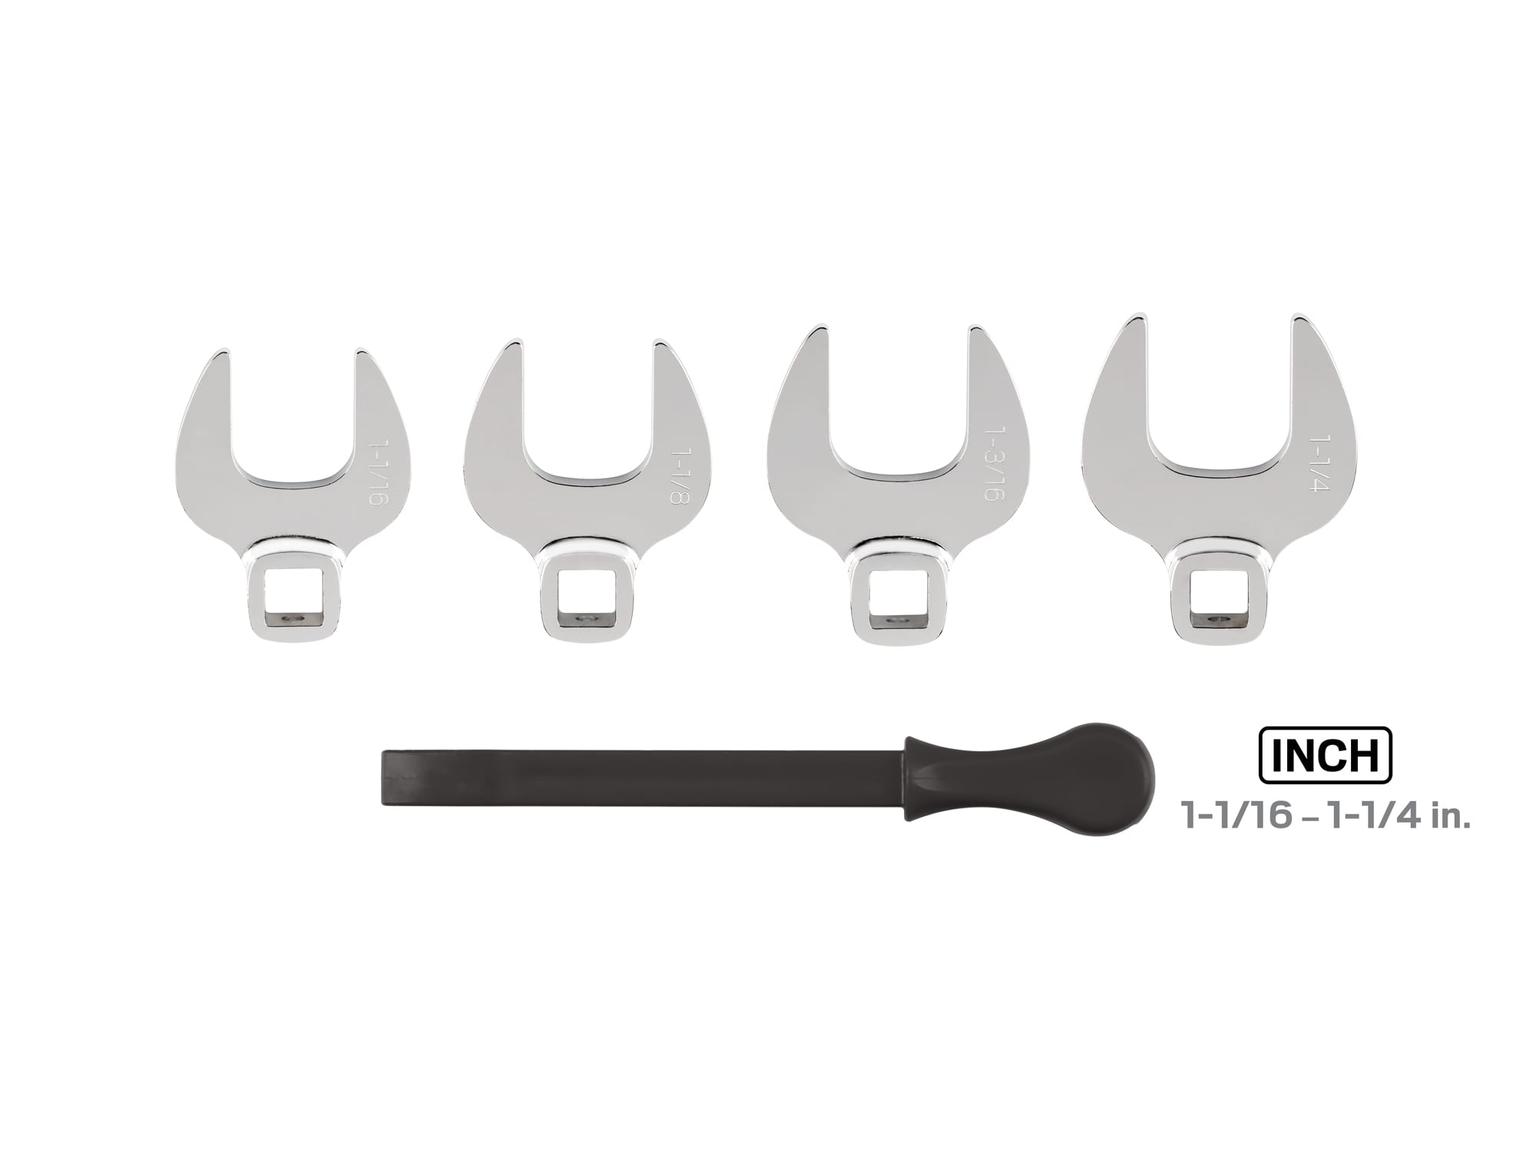 TEKTON WCF91403-T 1/2 Inch Drive Crowfoot Wrench Set with Key, 4-Piece (1-1/16 - 1-1/4 in.)